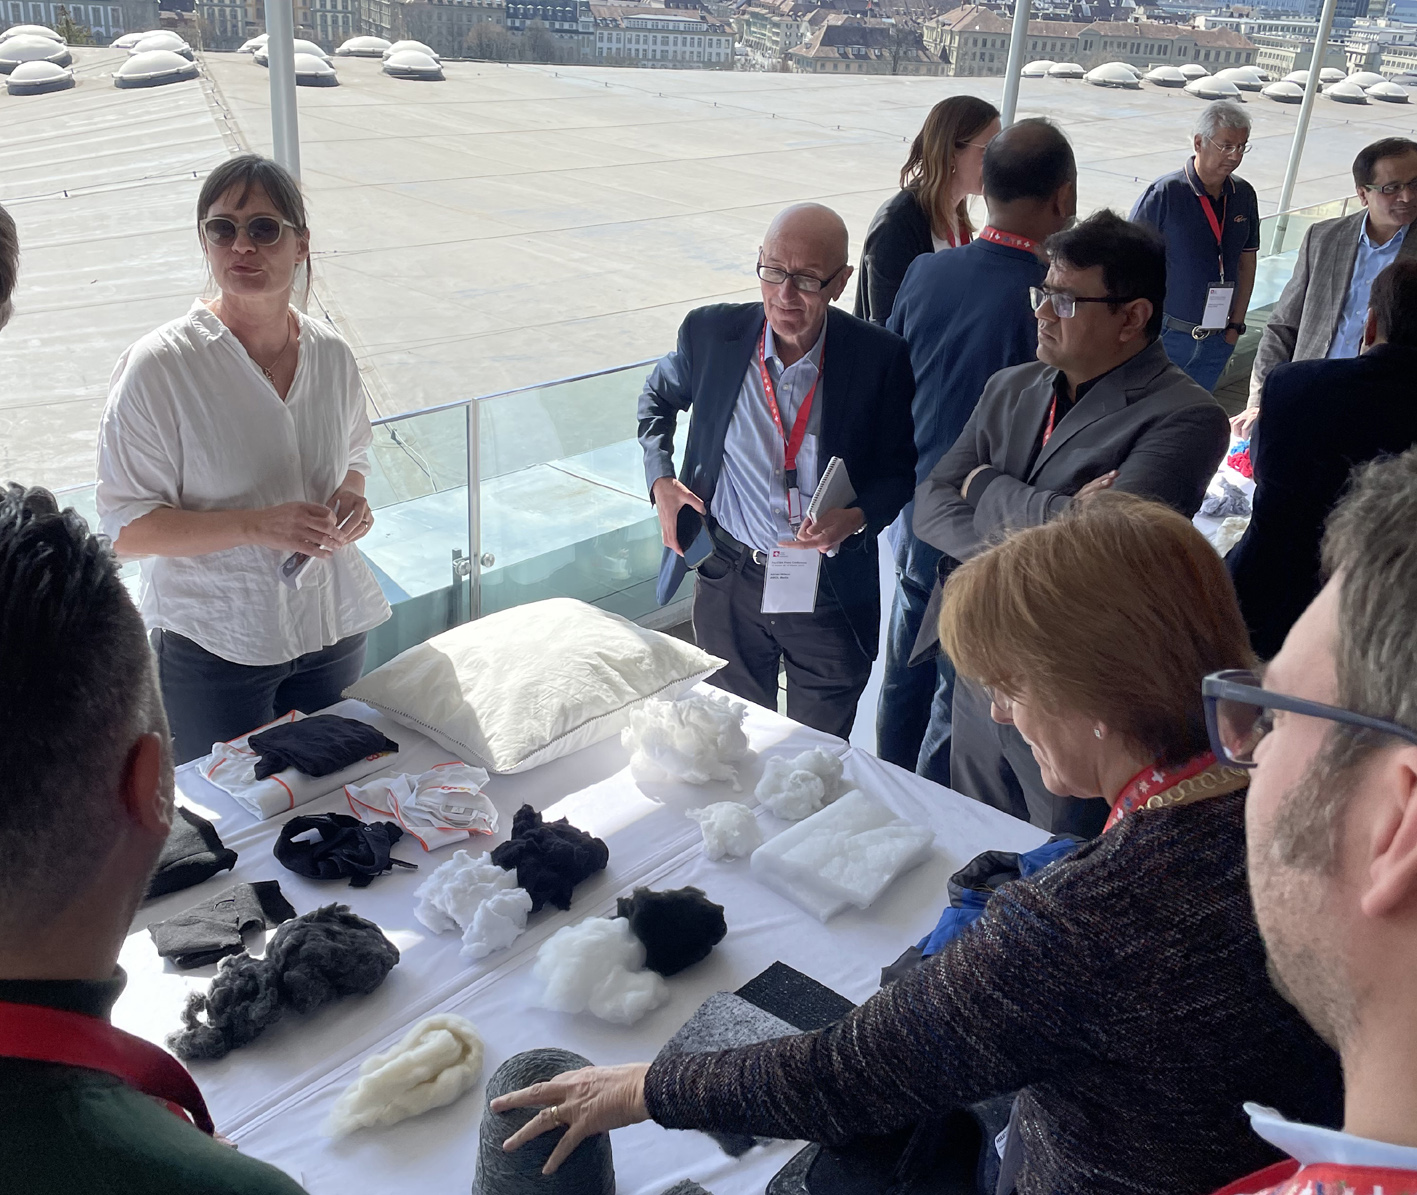 Brigitt Egloff of Lucerne University of Applied Sciences and Art explained the process steps involved in creating Texcircle Project prototypes during the Bern conference. © Swiss Textile Machinery 